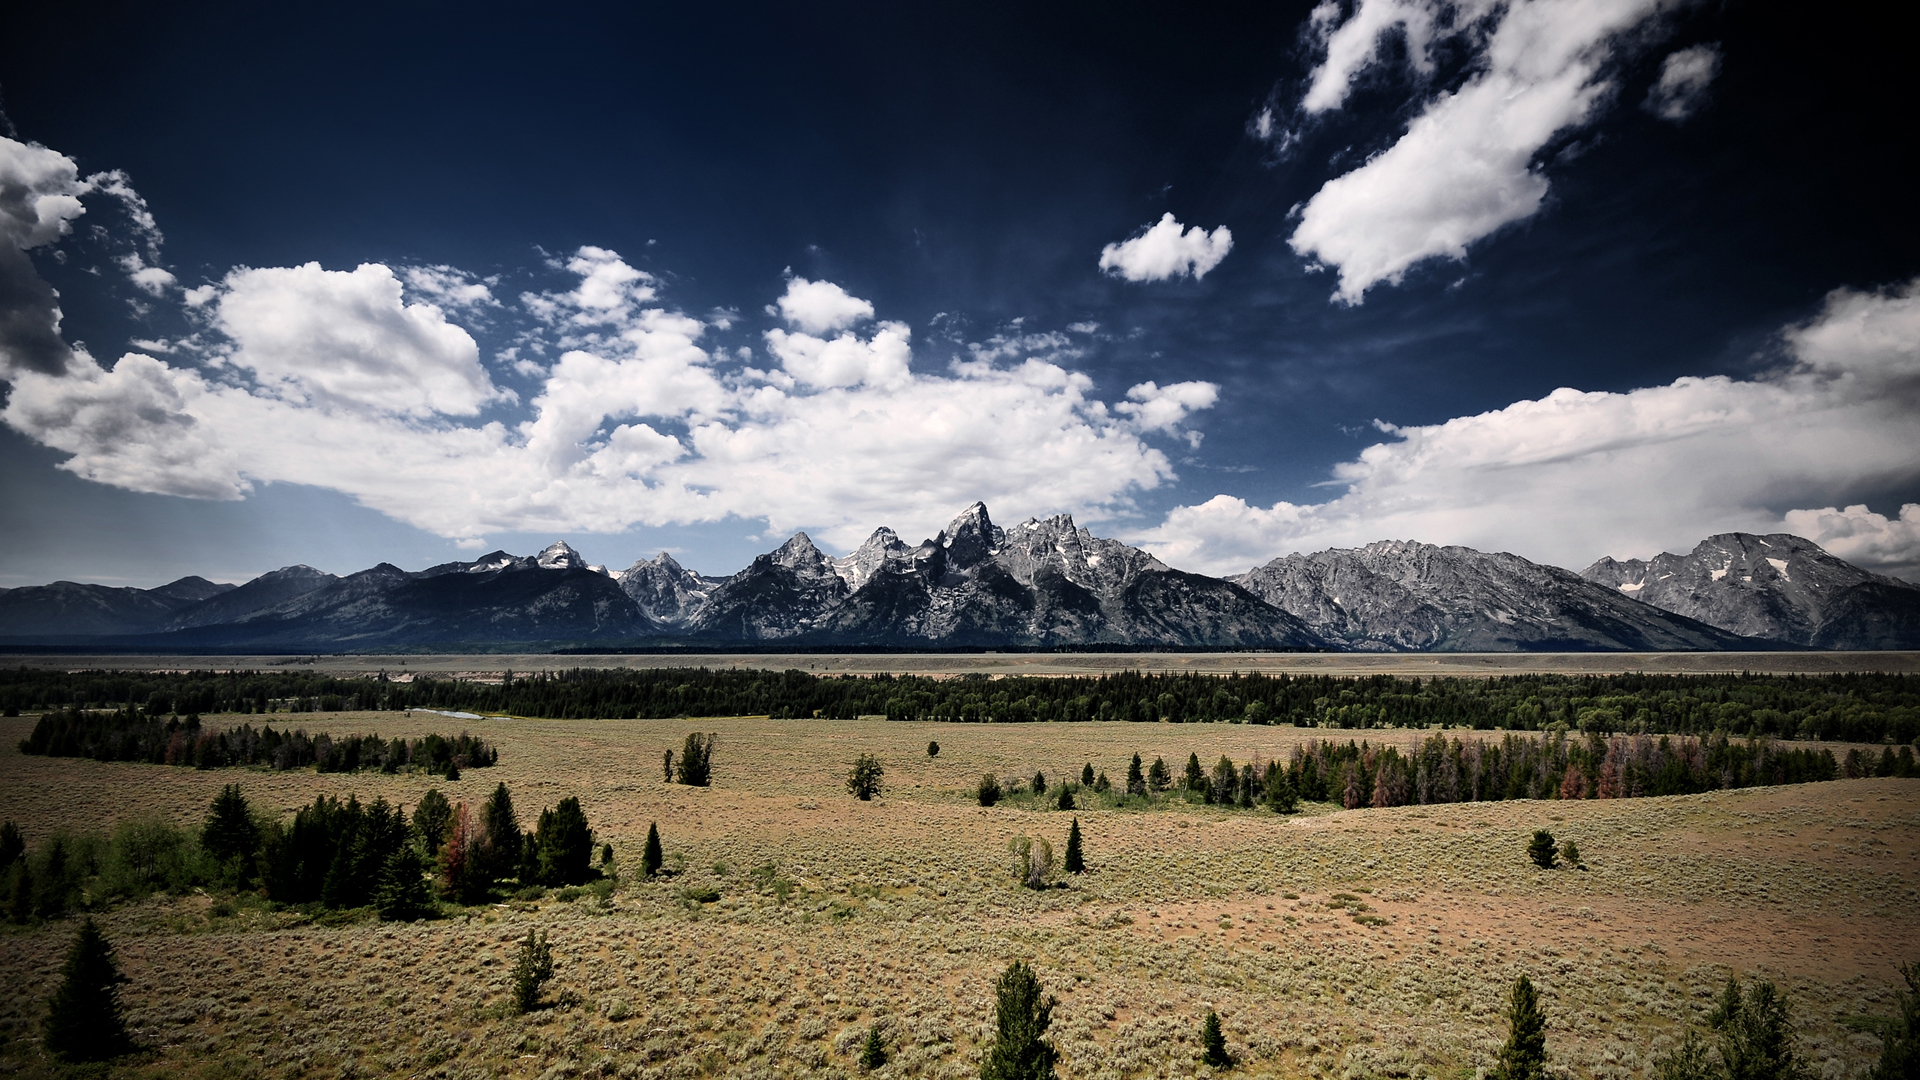 mountains, clouds, landscapes, nature, snow, Wyoming, Rocky Mountains - desktop wallpaper